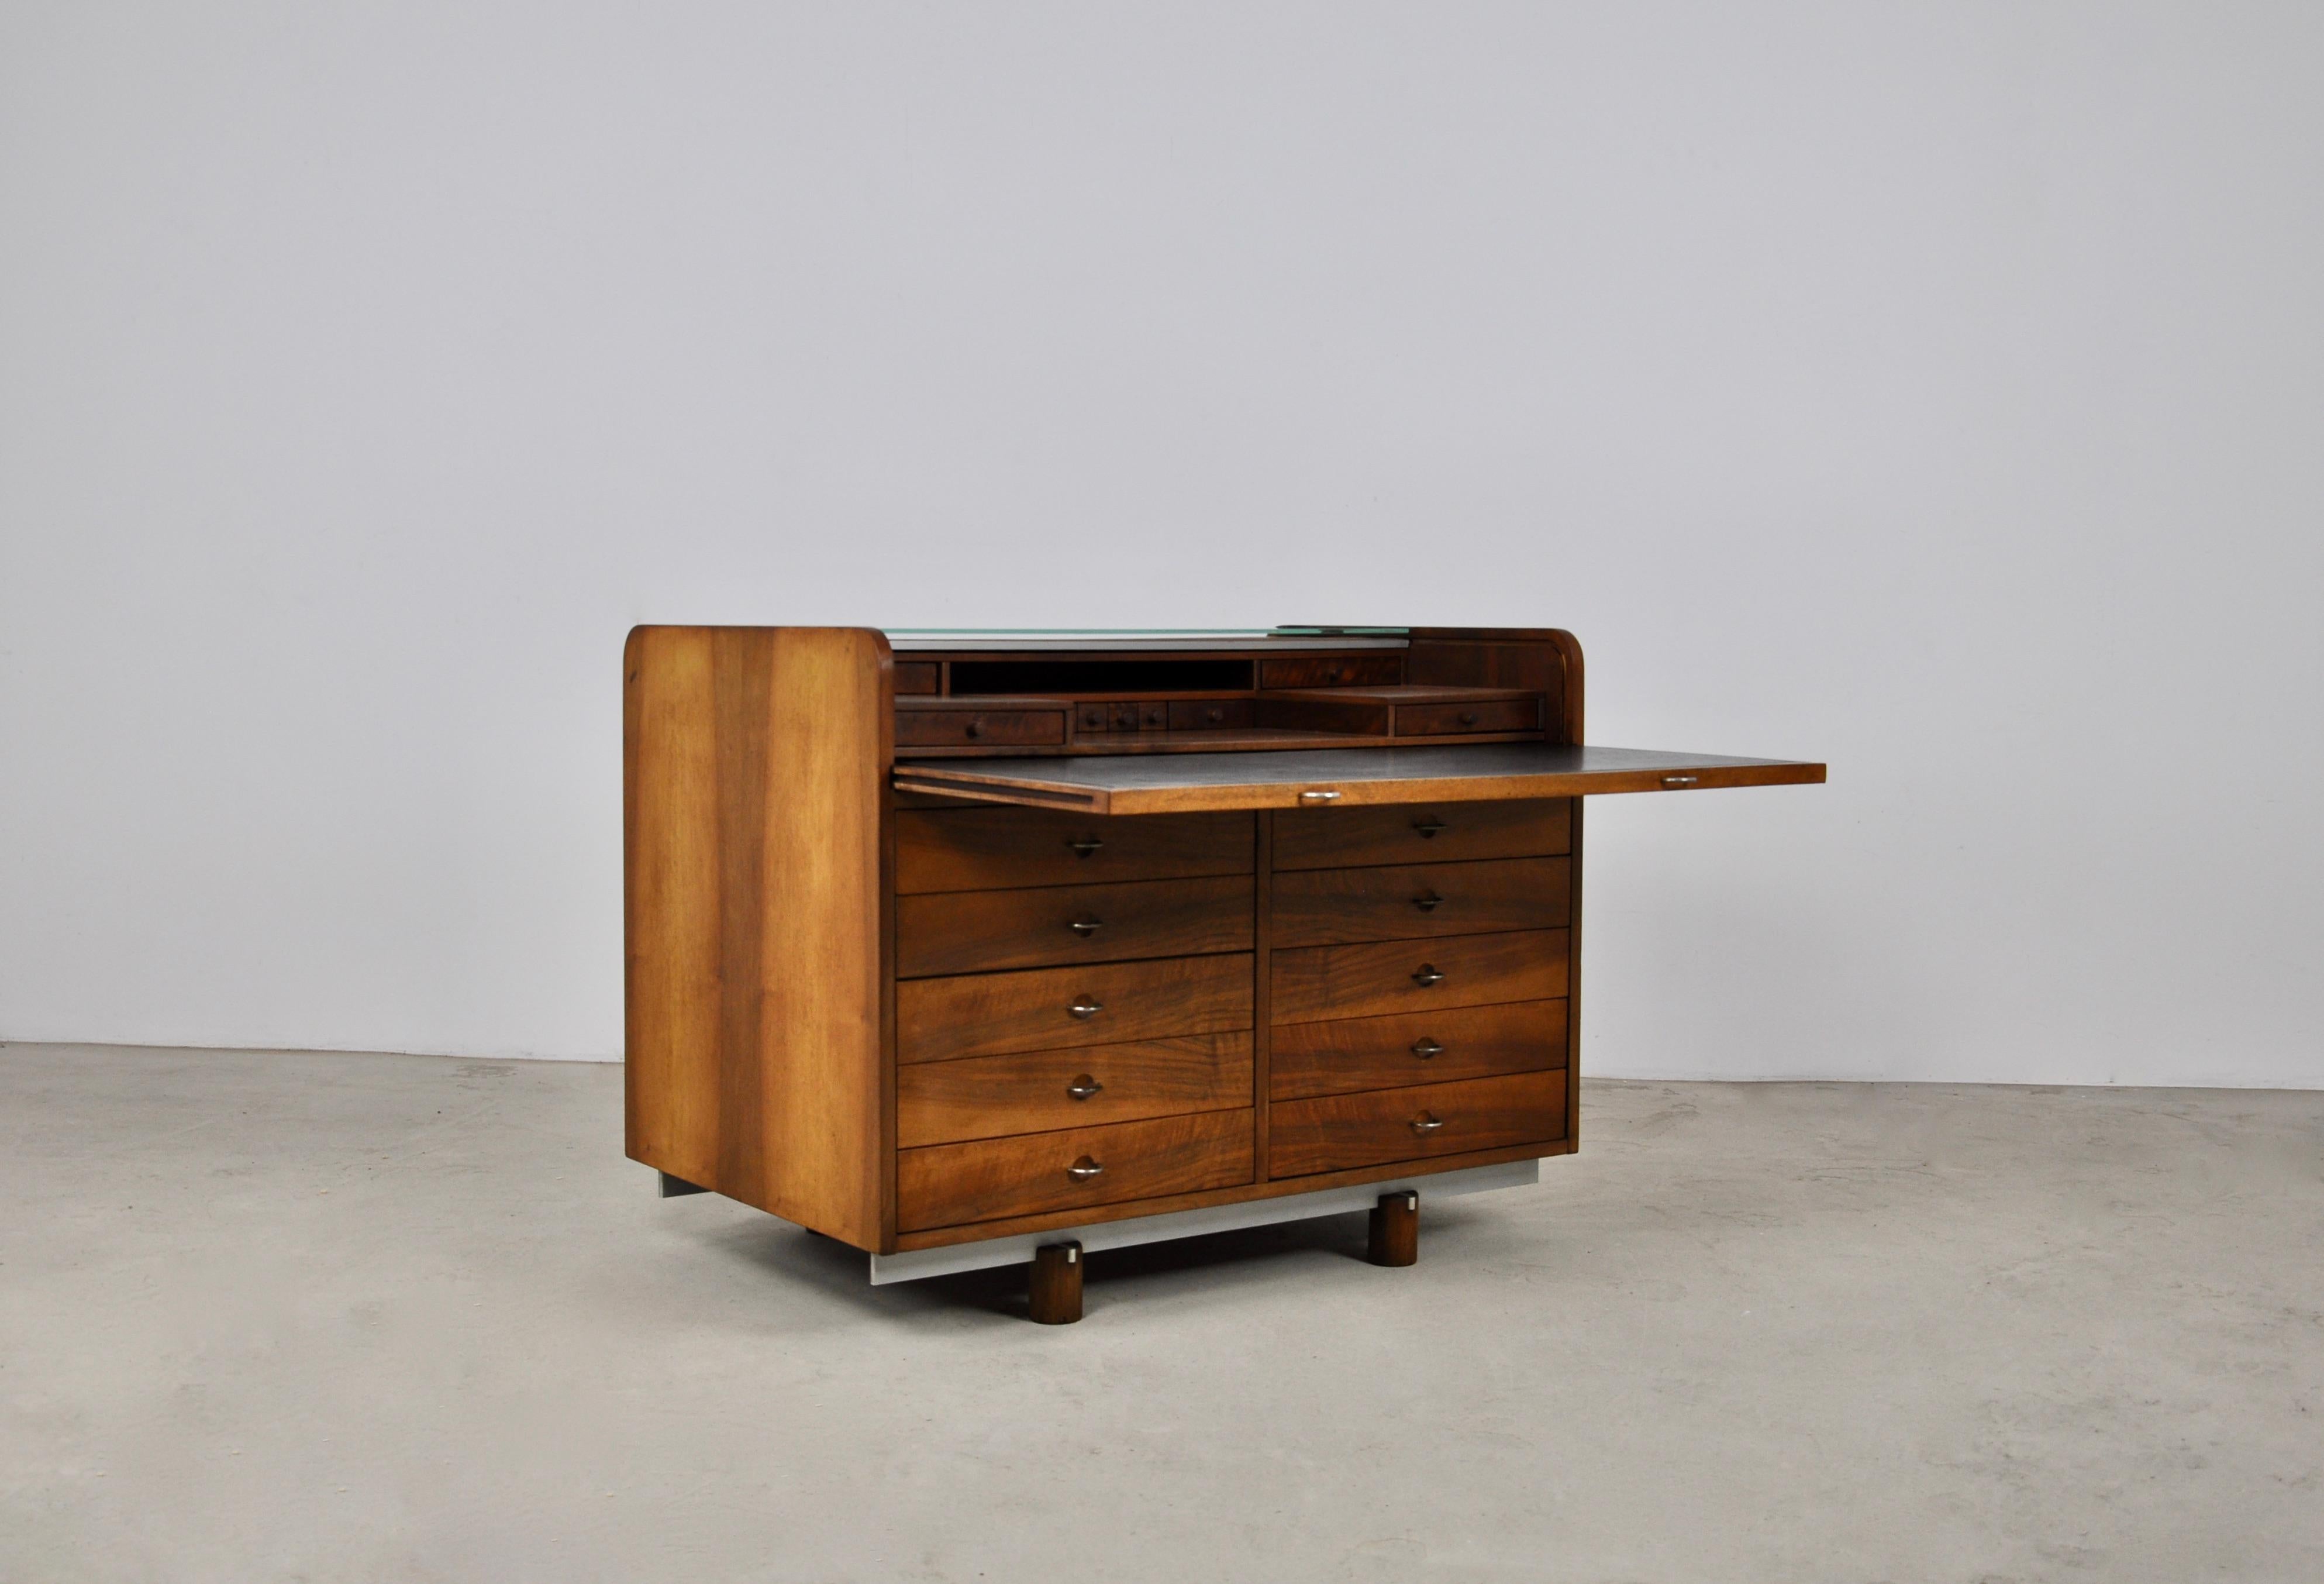 Wooden secretary. The roll top opens by pulling on the leather inlaid writing surface, underneath it are small drawers. This secretary has 10 drawers in the front, several drawers behind the roll top and in the back there are two glass shelves. The